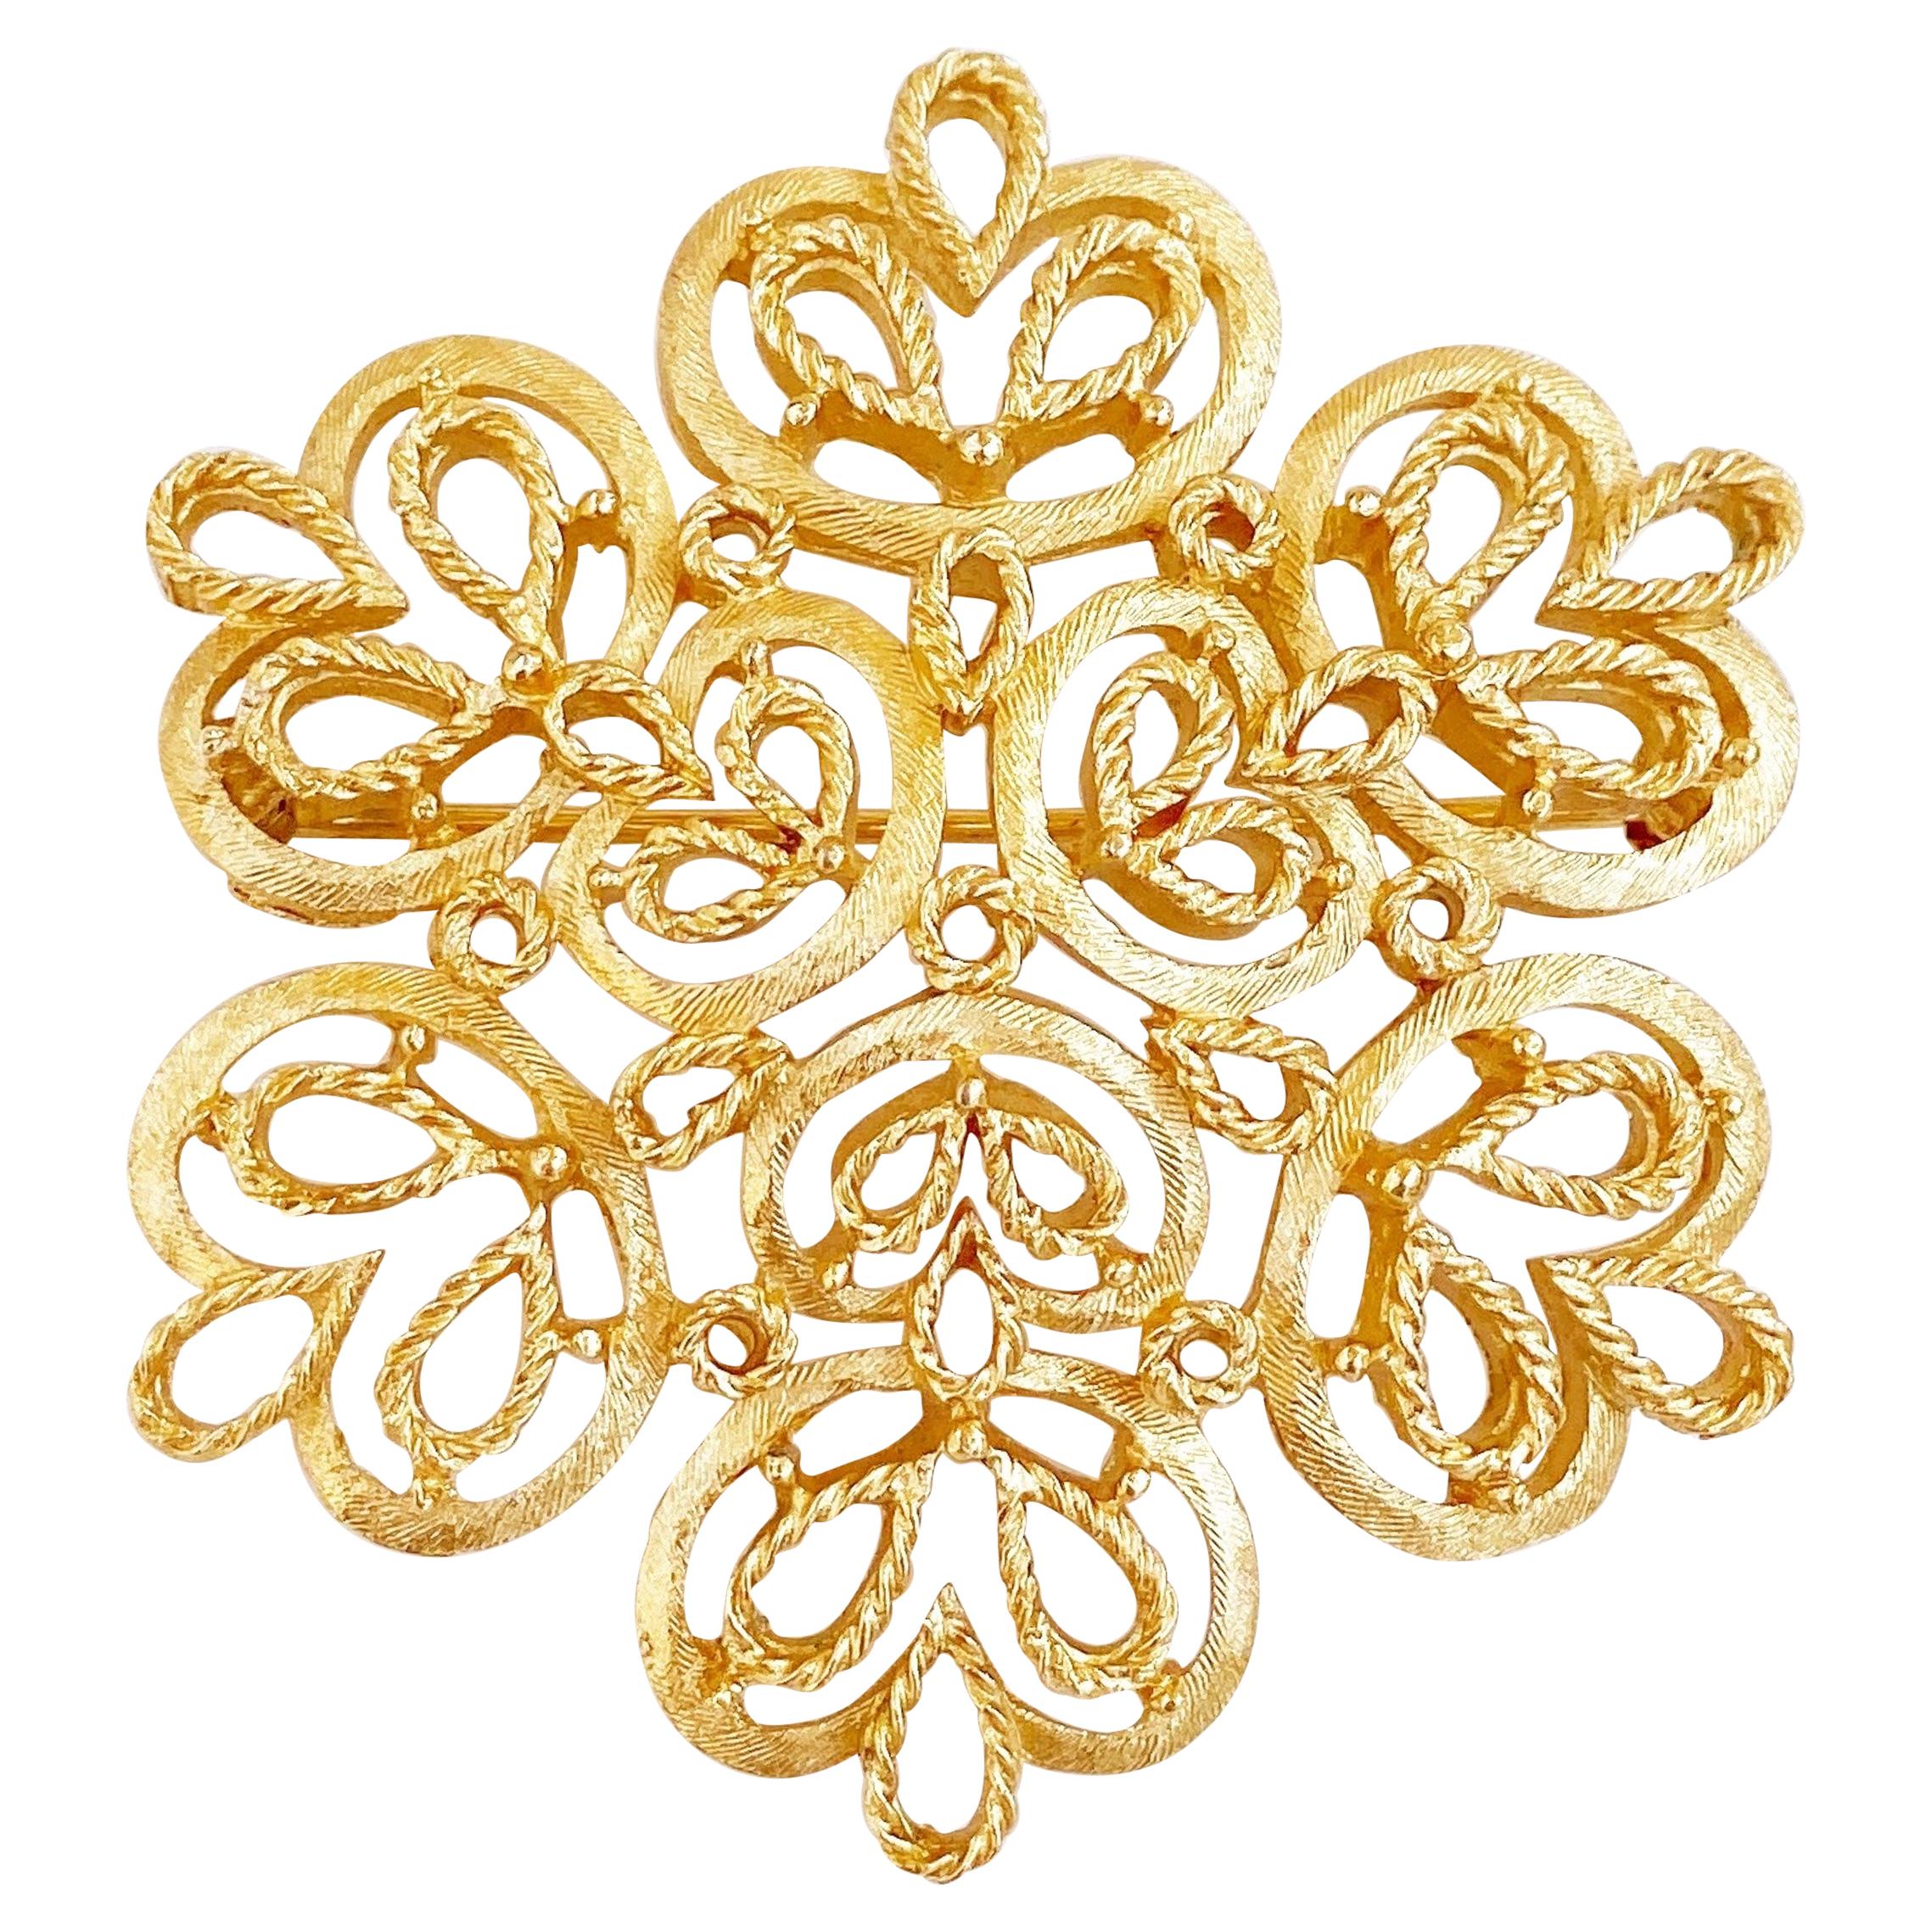 1960s Ornate Gilded Abstract Floral Brooch With Braided Texture By Crown Trifari